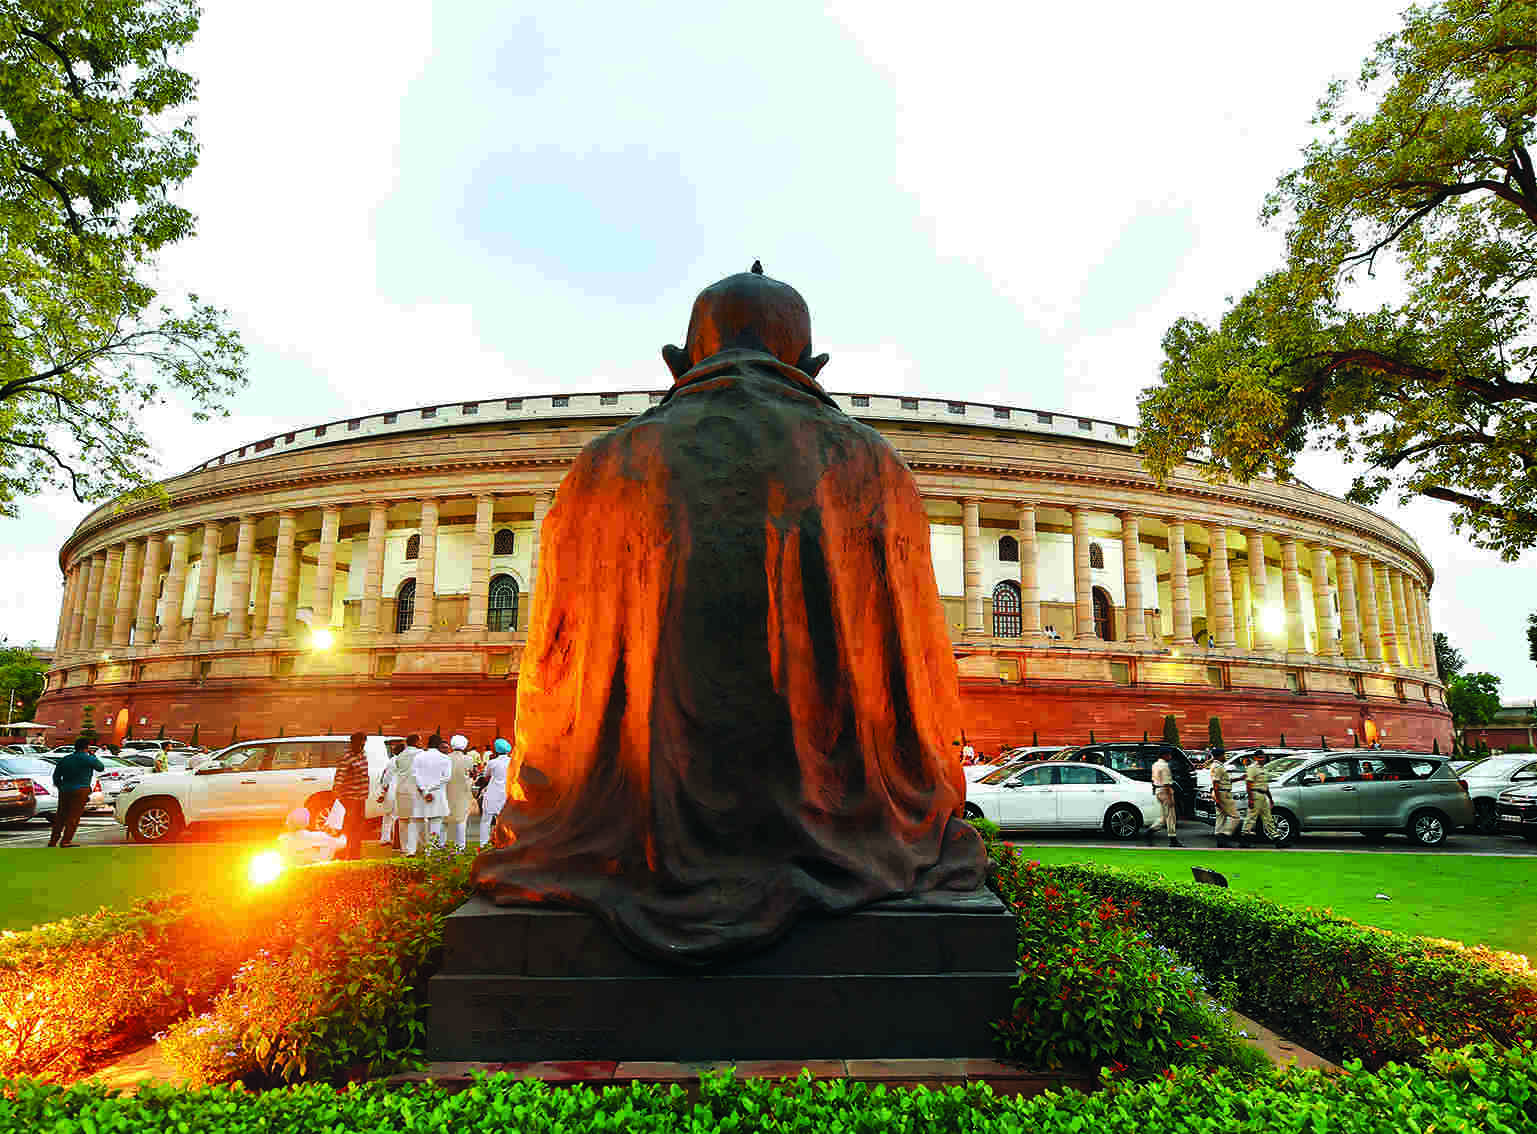 BJP first party since 1990 to touch 100-seat mark in Rajya Sabha